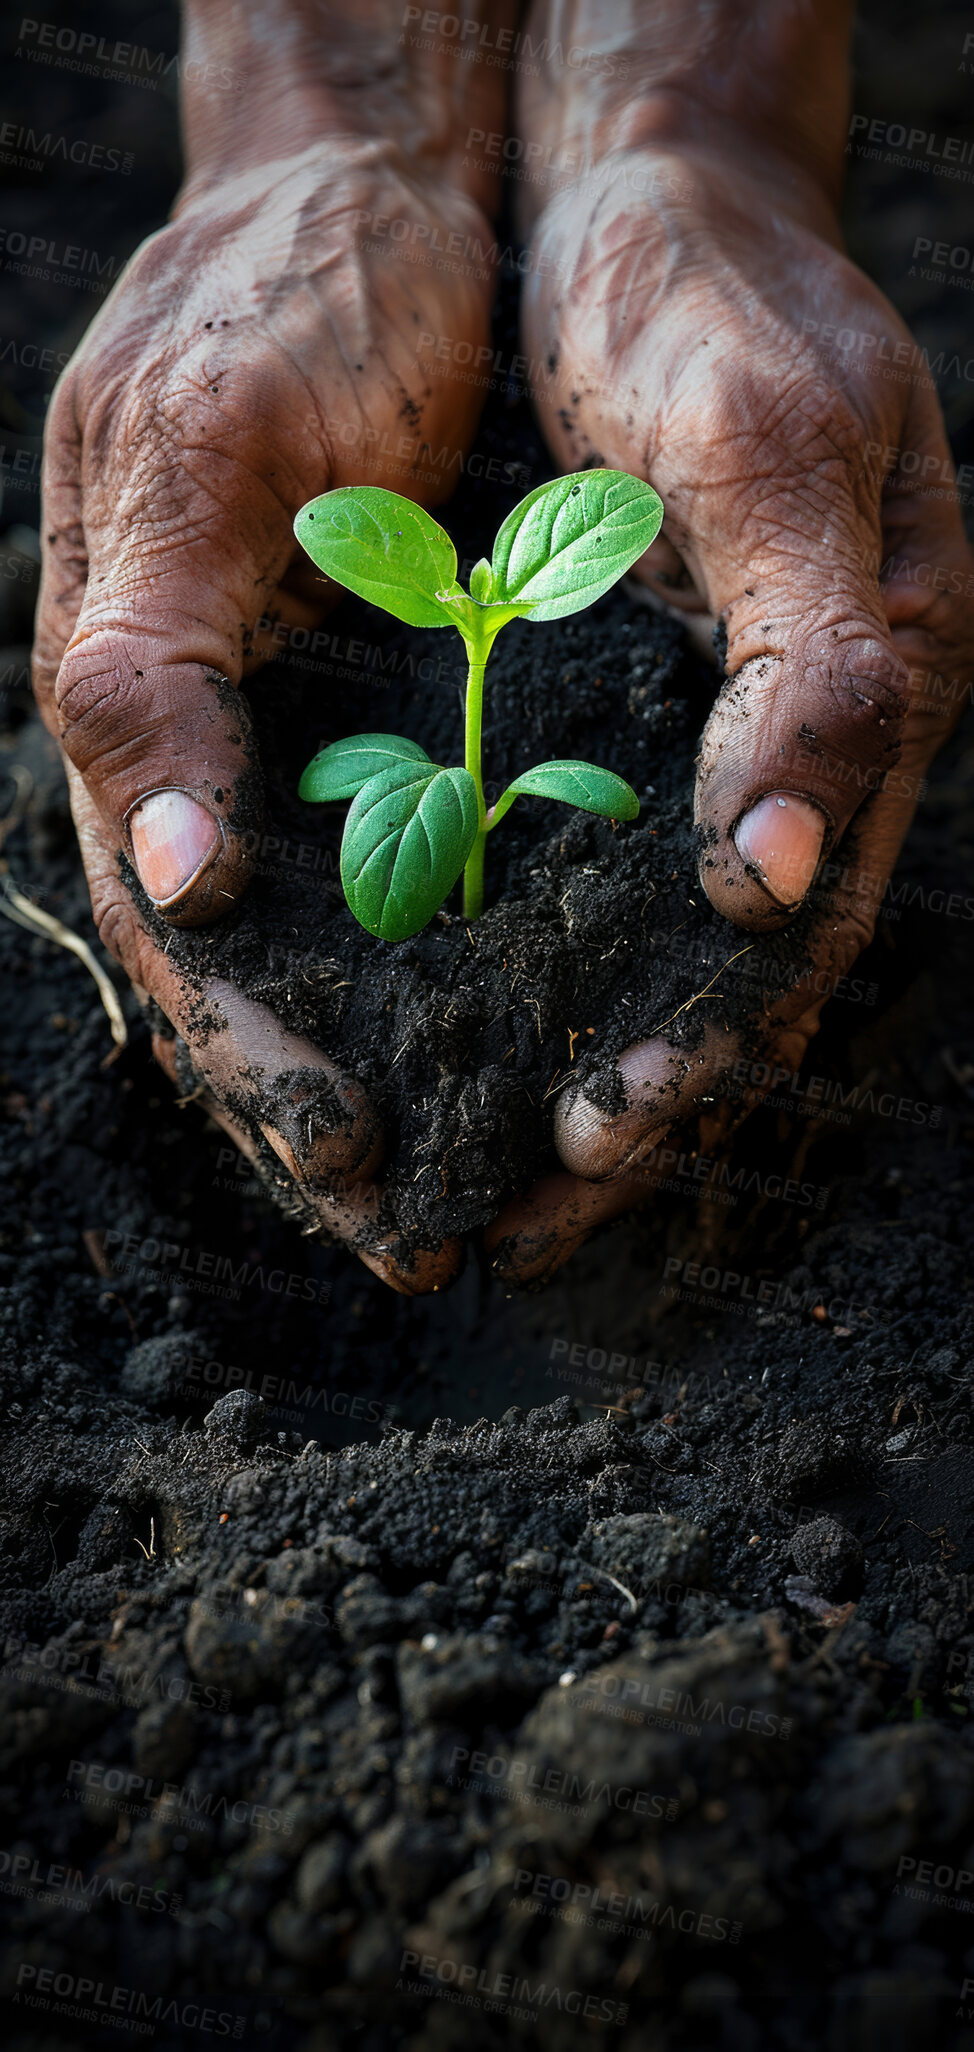 Buy stock photo Seedling, volunteer and plant in soil, hands and future of environment, farmer and outdoor in nature of garden. Agriculture, dirt and growth with care for sustainability, eco friendly and project